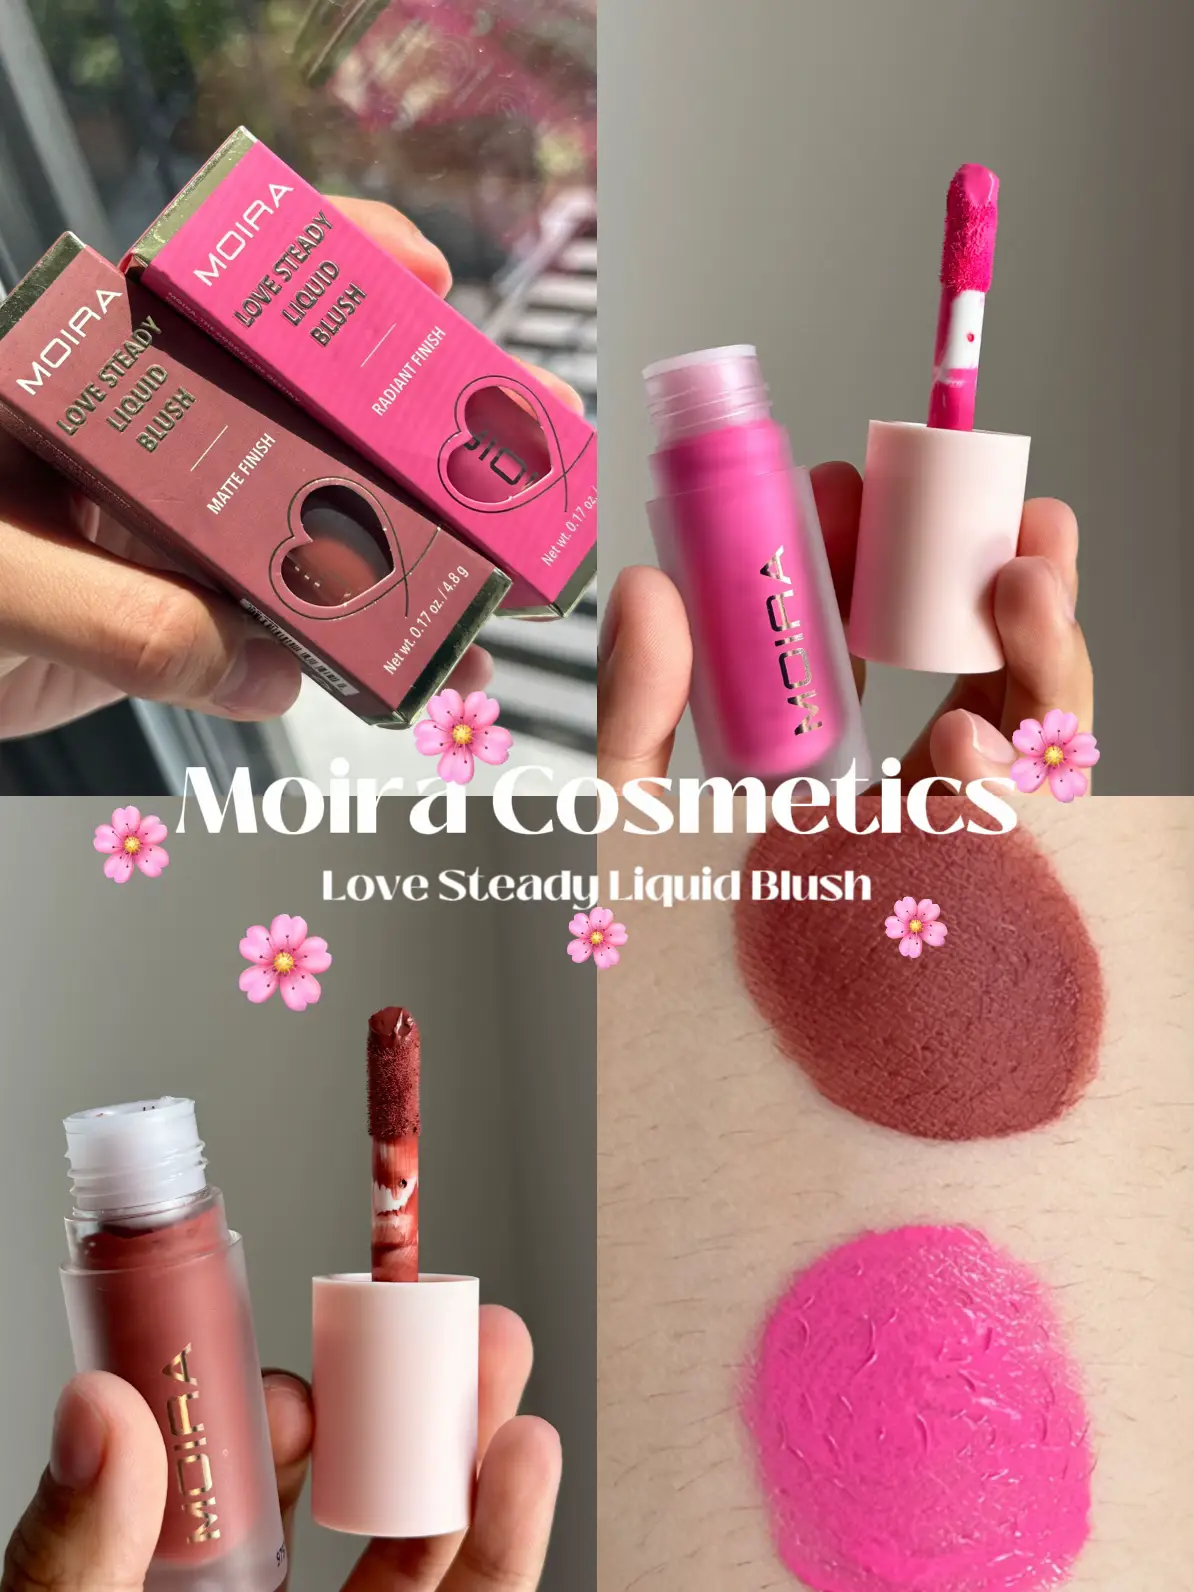 NEW* Moira Cosmetics Liquid Blush 🌸, Gallery posted by cathalyn